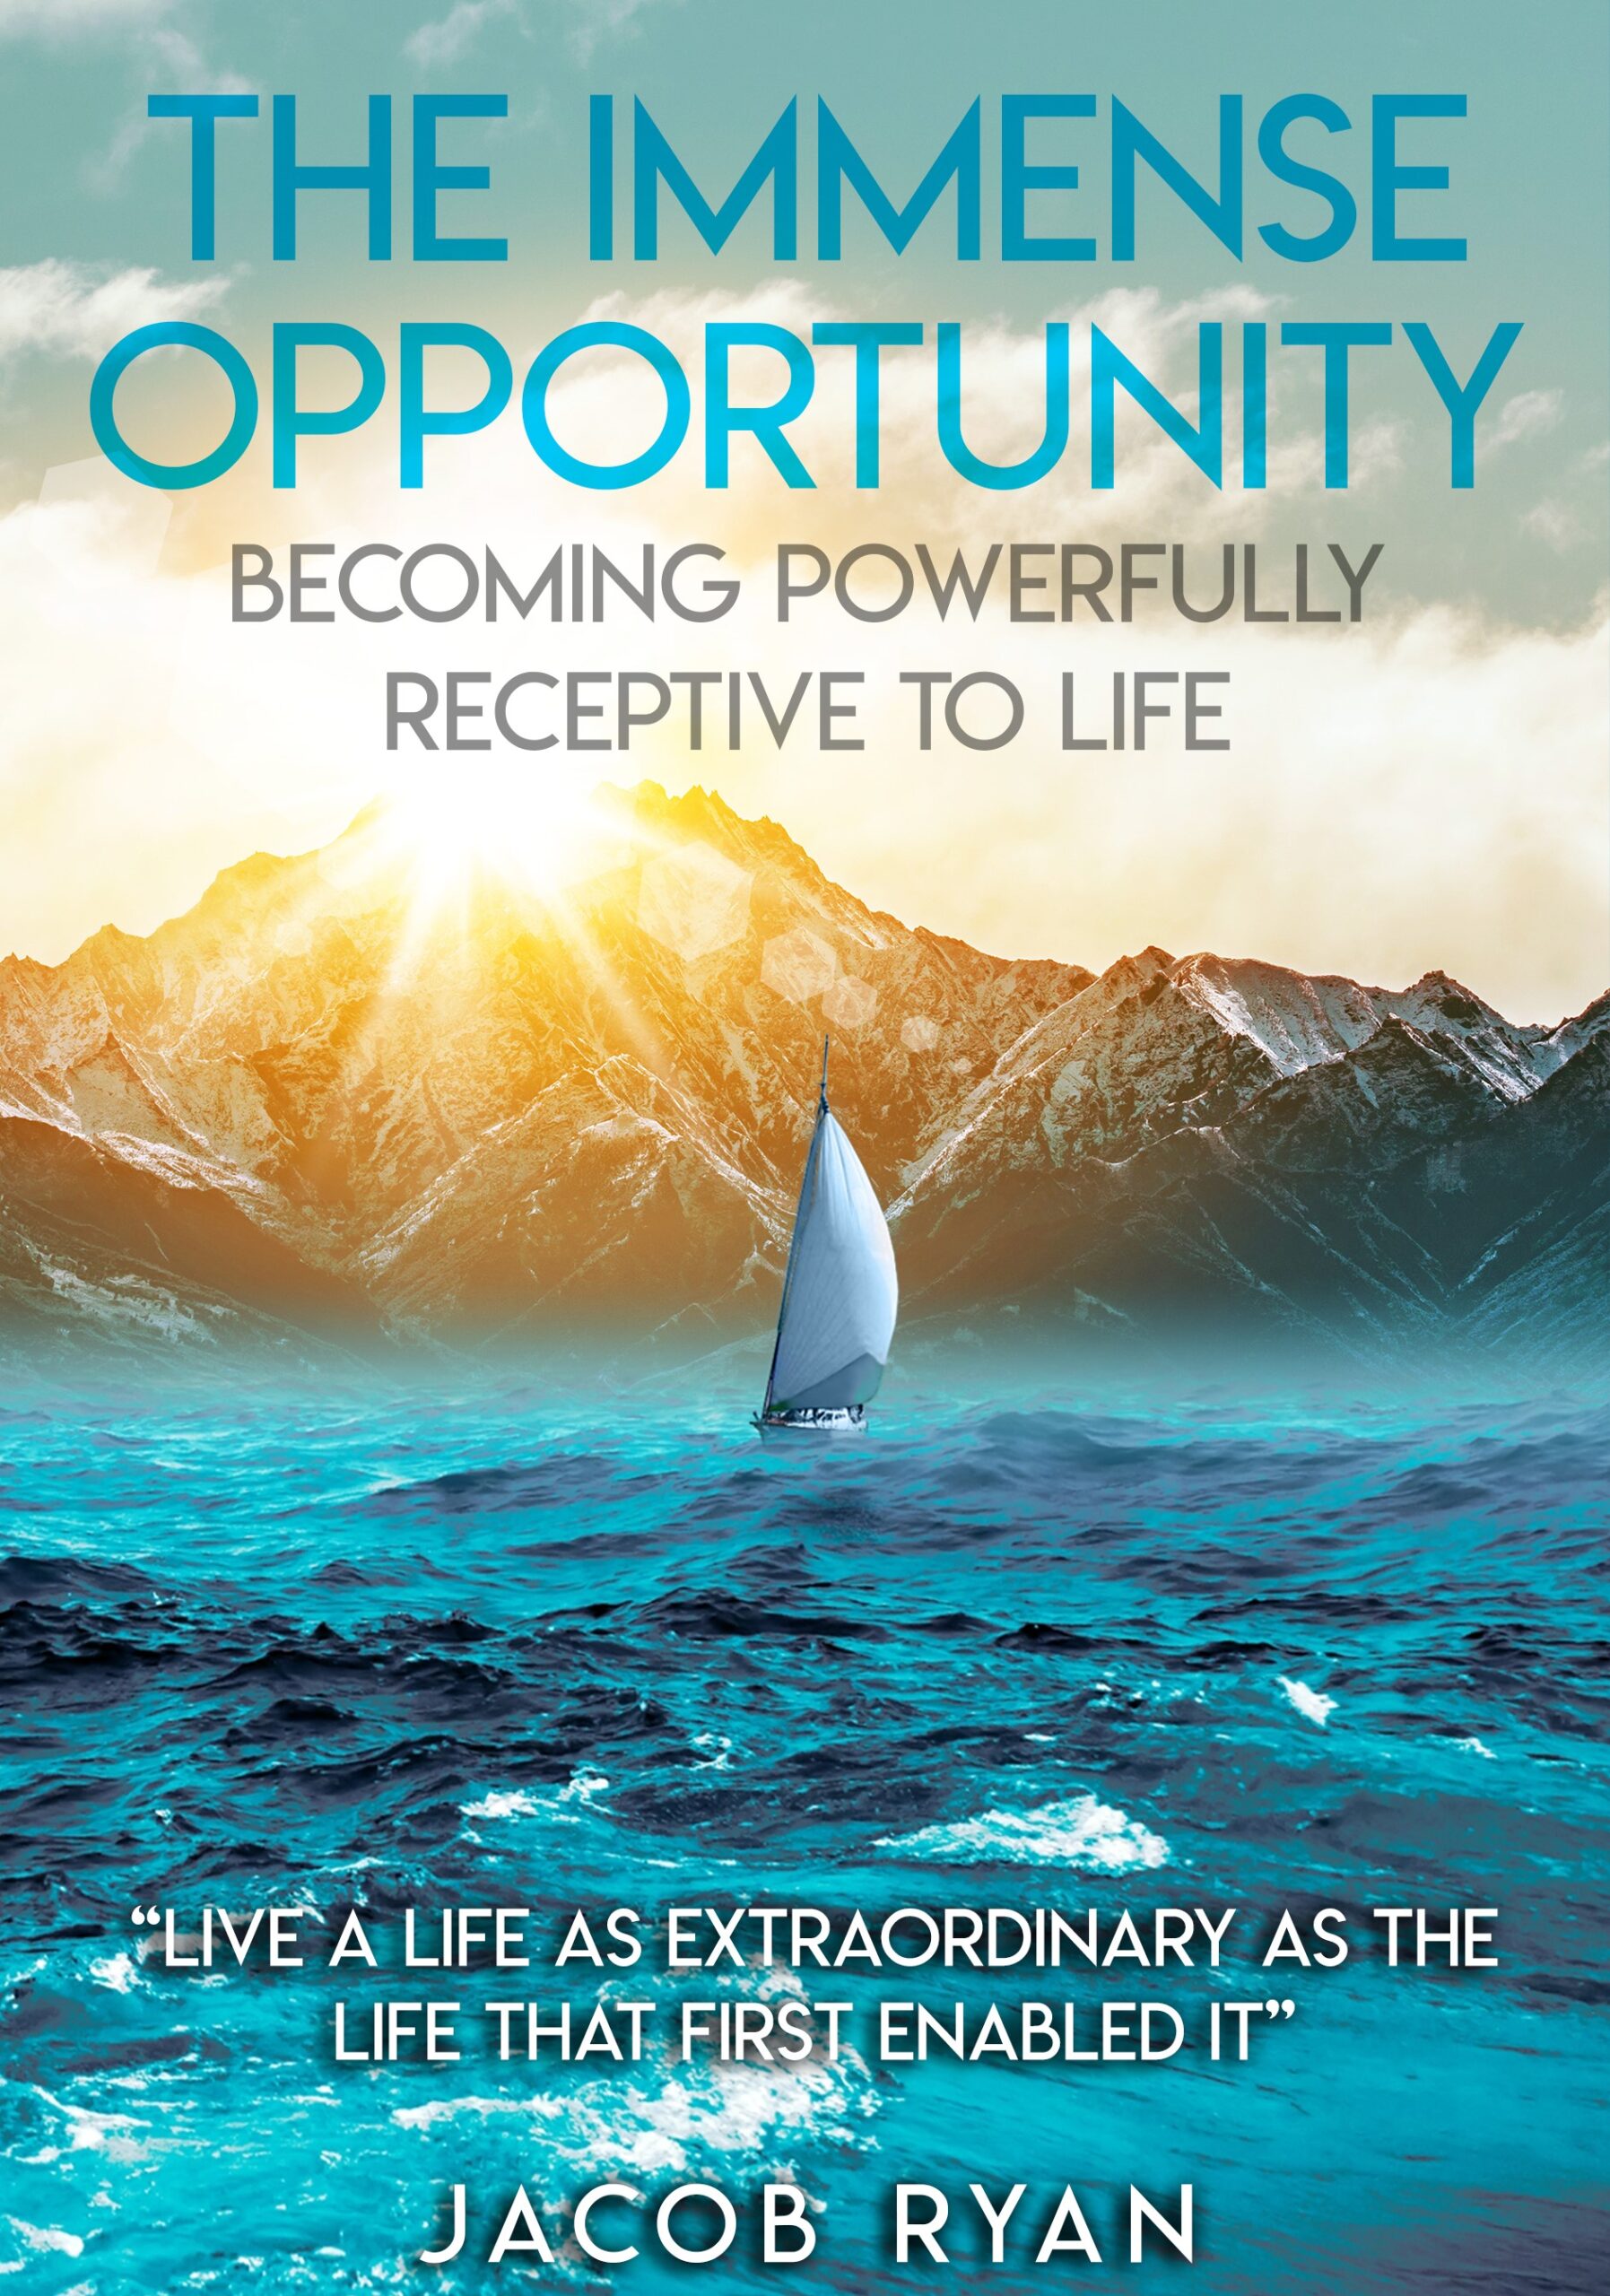 FREE: The Immense Opportunity: Becoming Powerfully Receptive to Life by Jacob Ryan